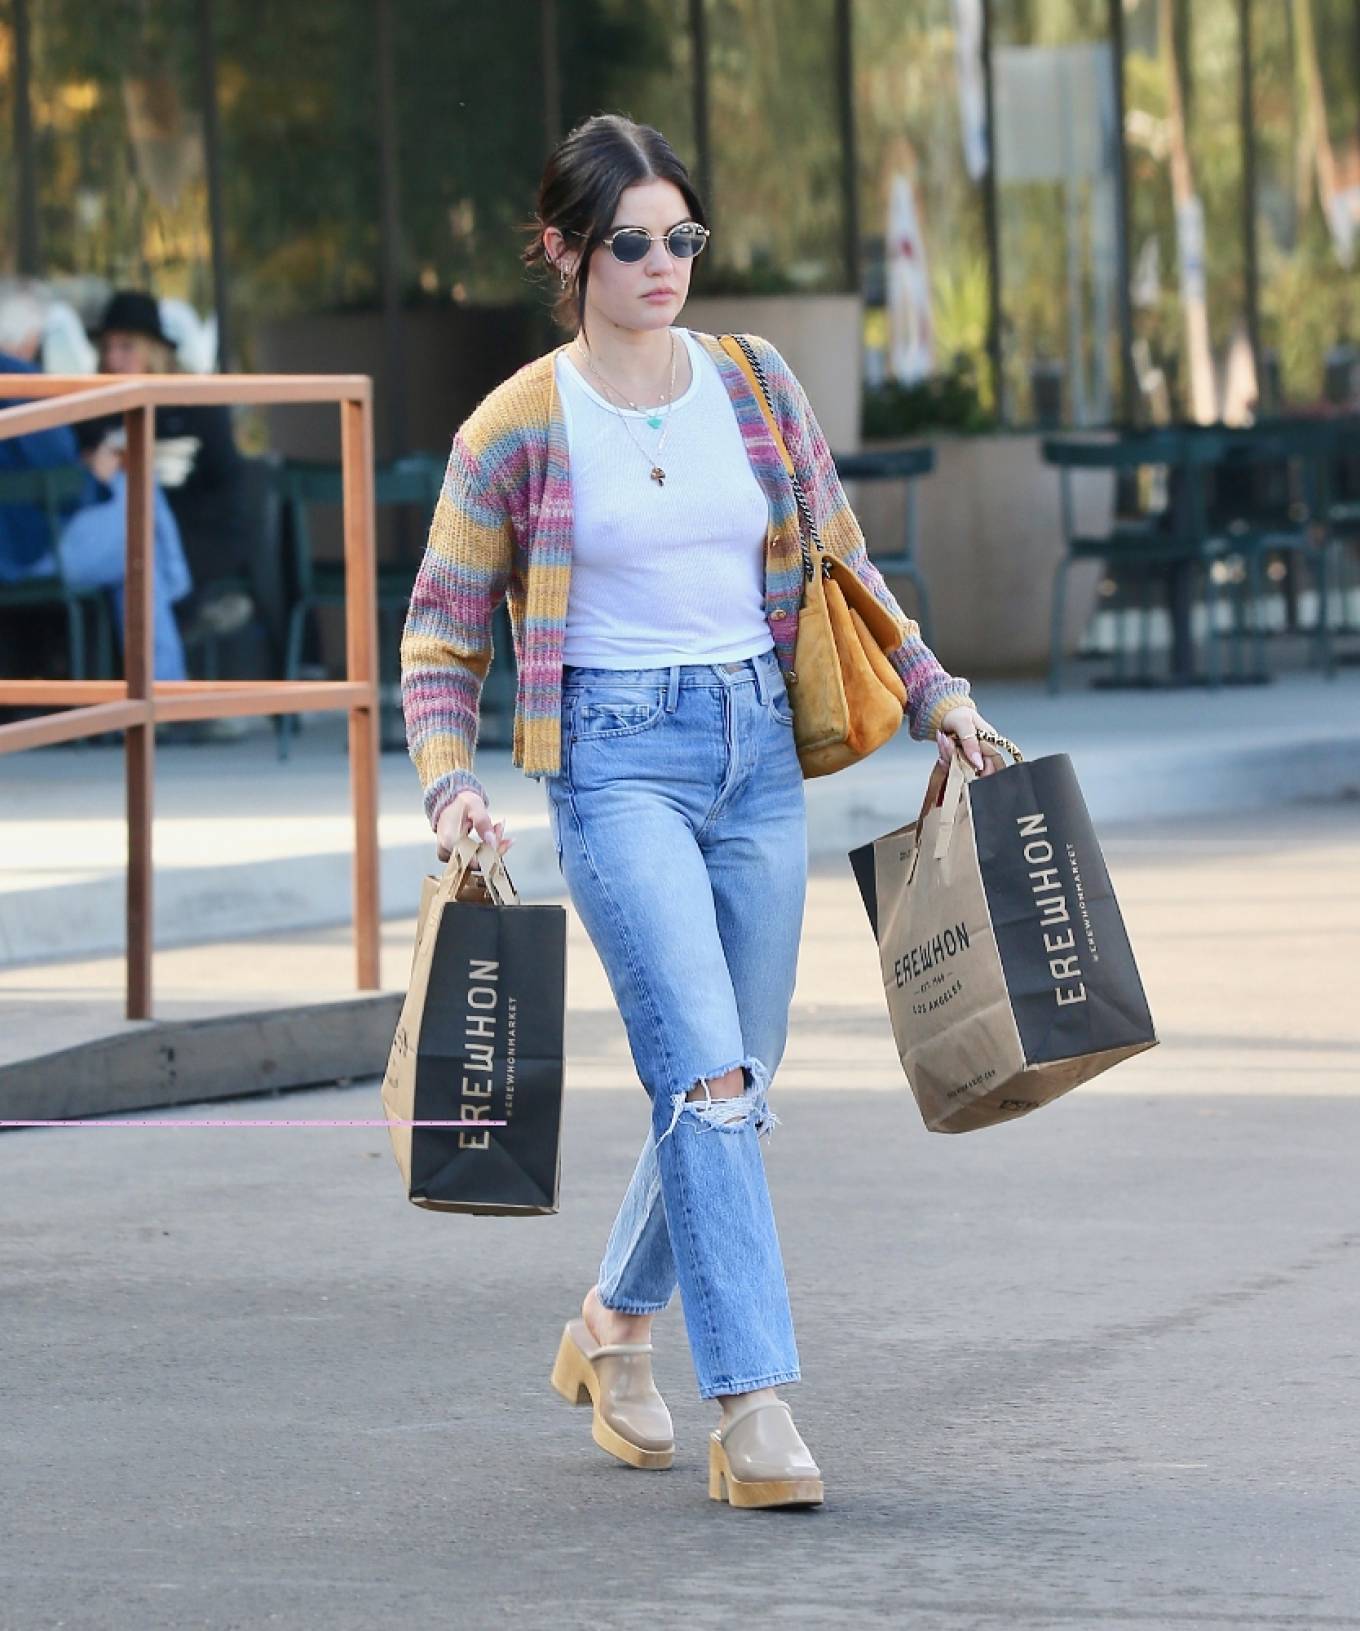 Lucy Hale 2021 : Lucy Hale – Shopping at Erewhon Market in Studio City-03